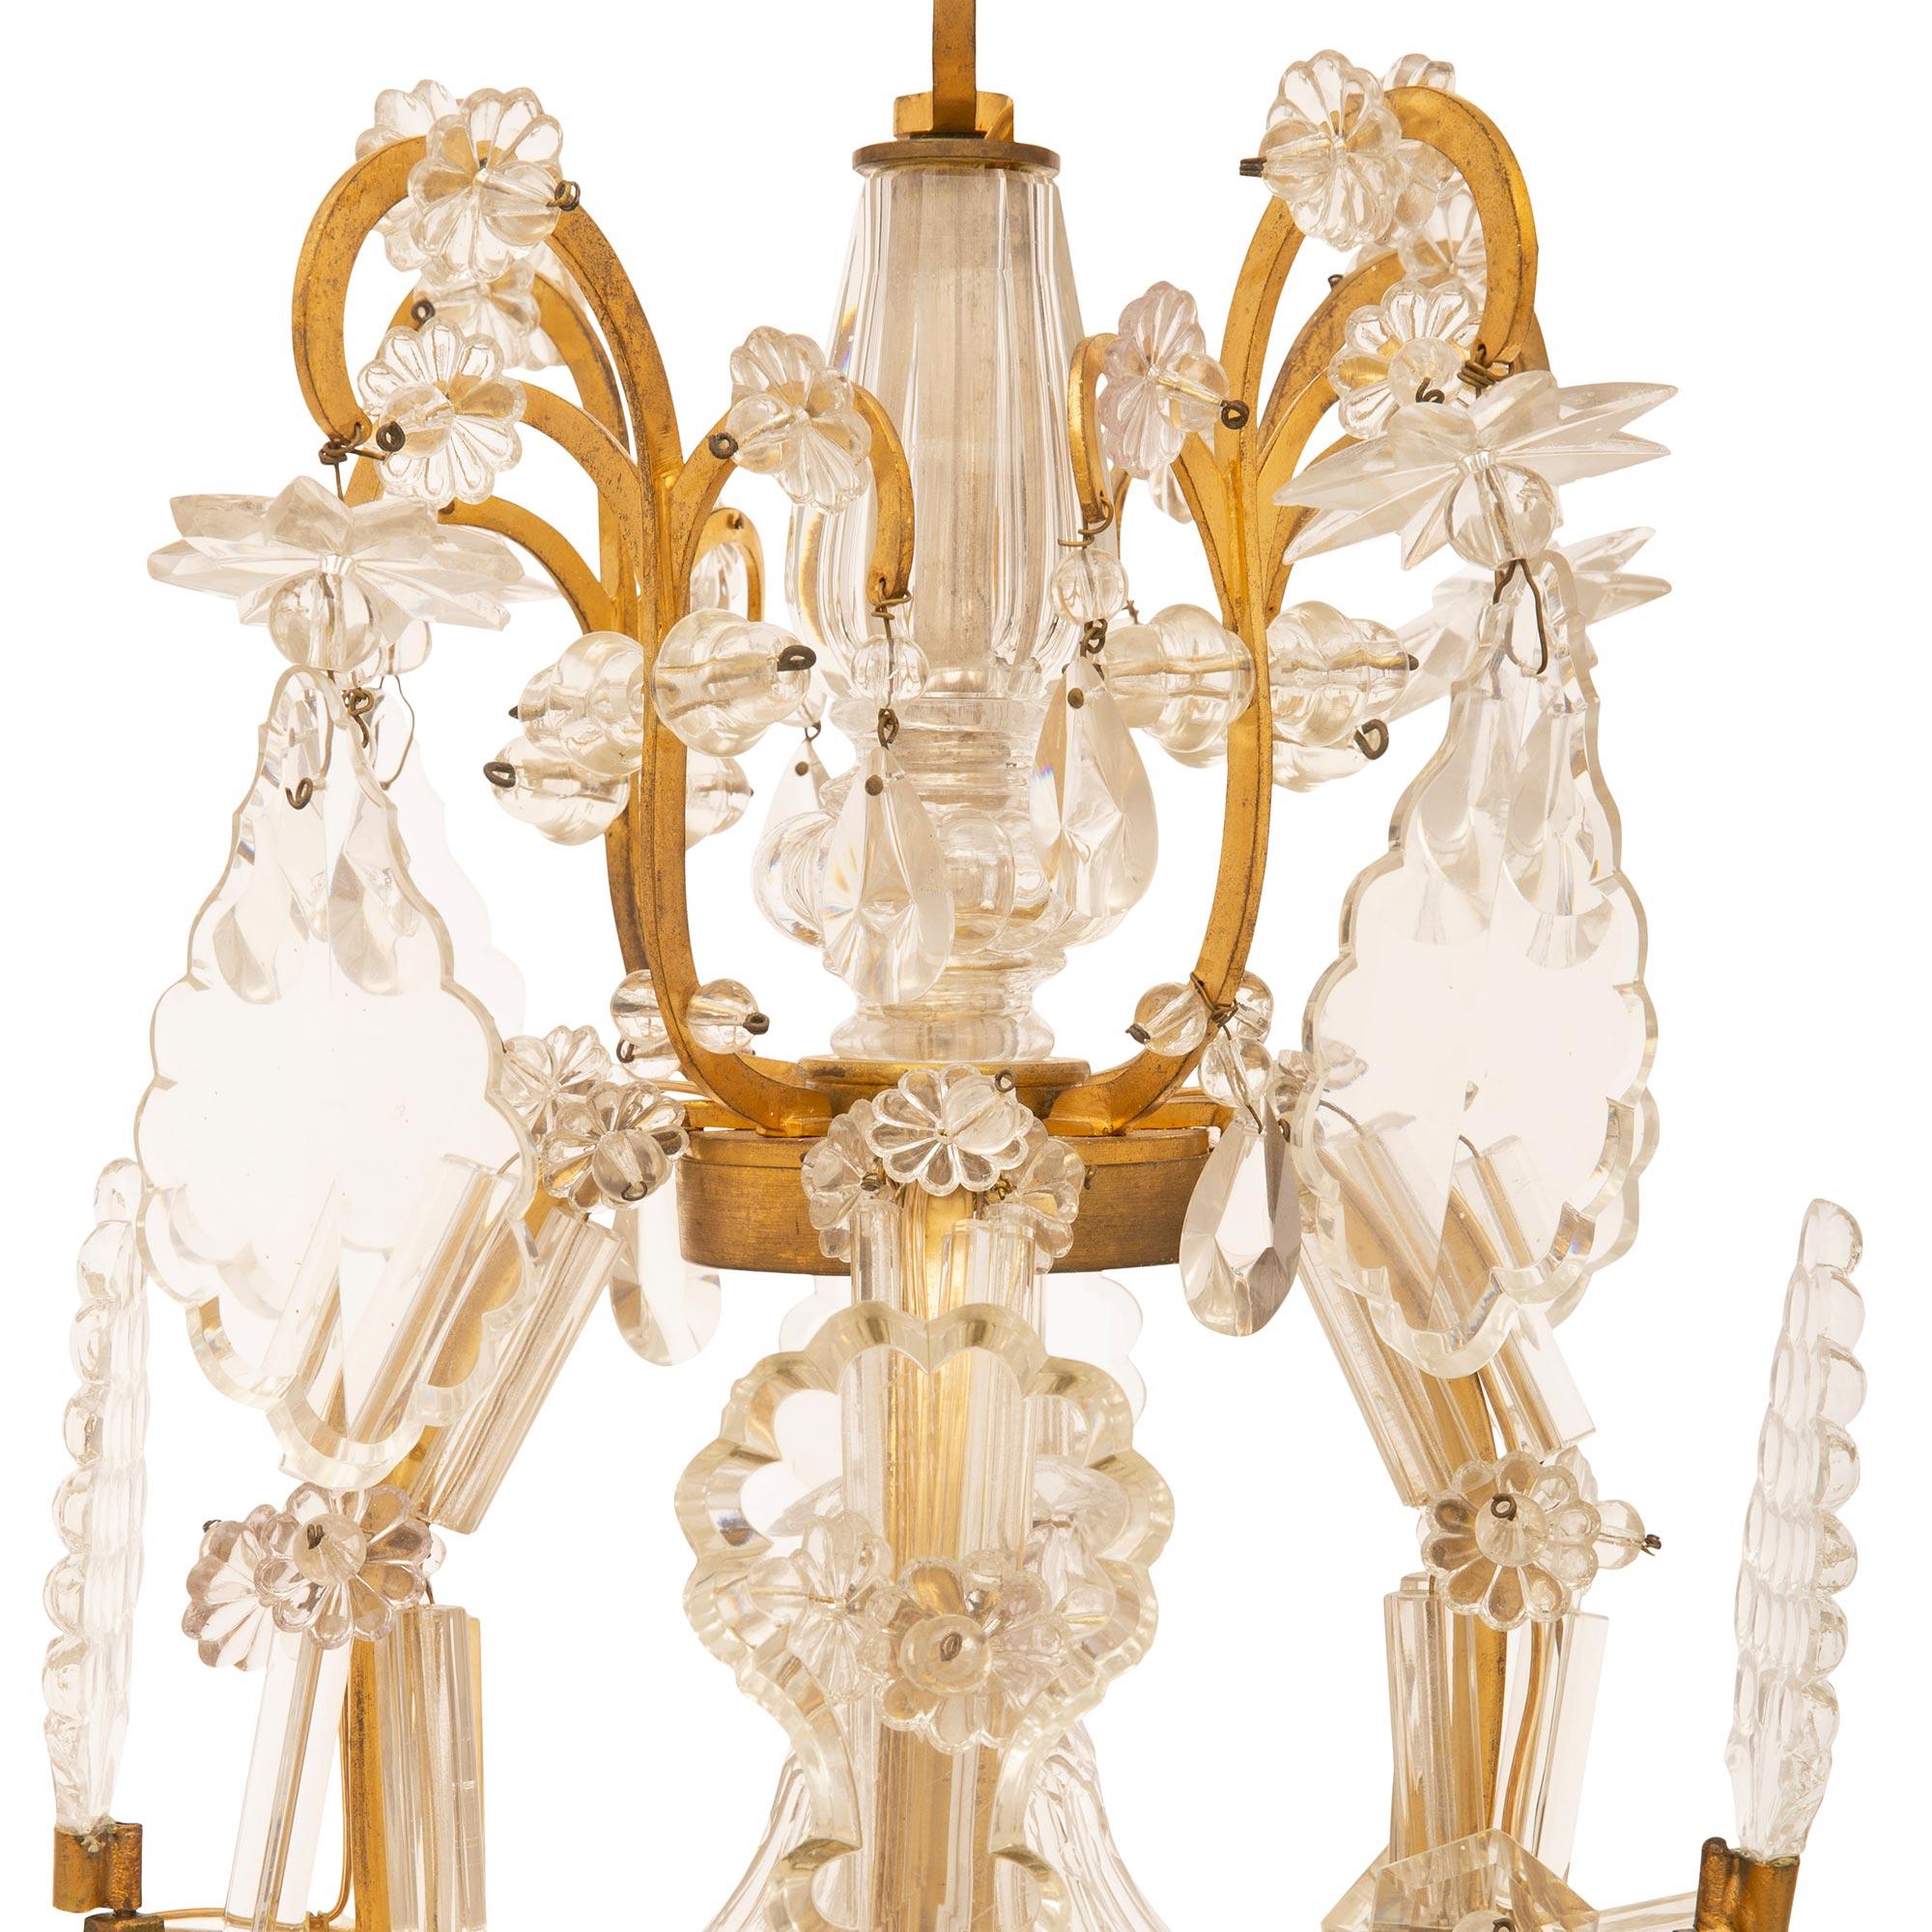 French Mid-19th Century Louis XV Style Ormolu and Baccarat Crystal Chandelier In Good Condition For Sale In West Palm Beach, FL